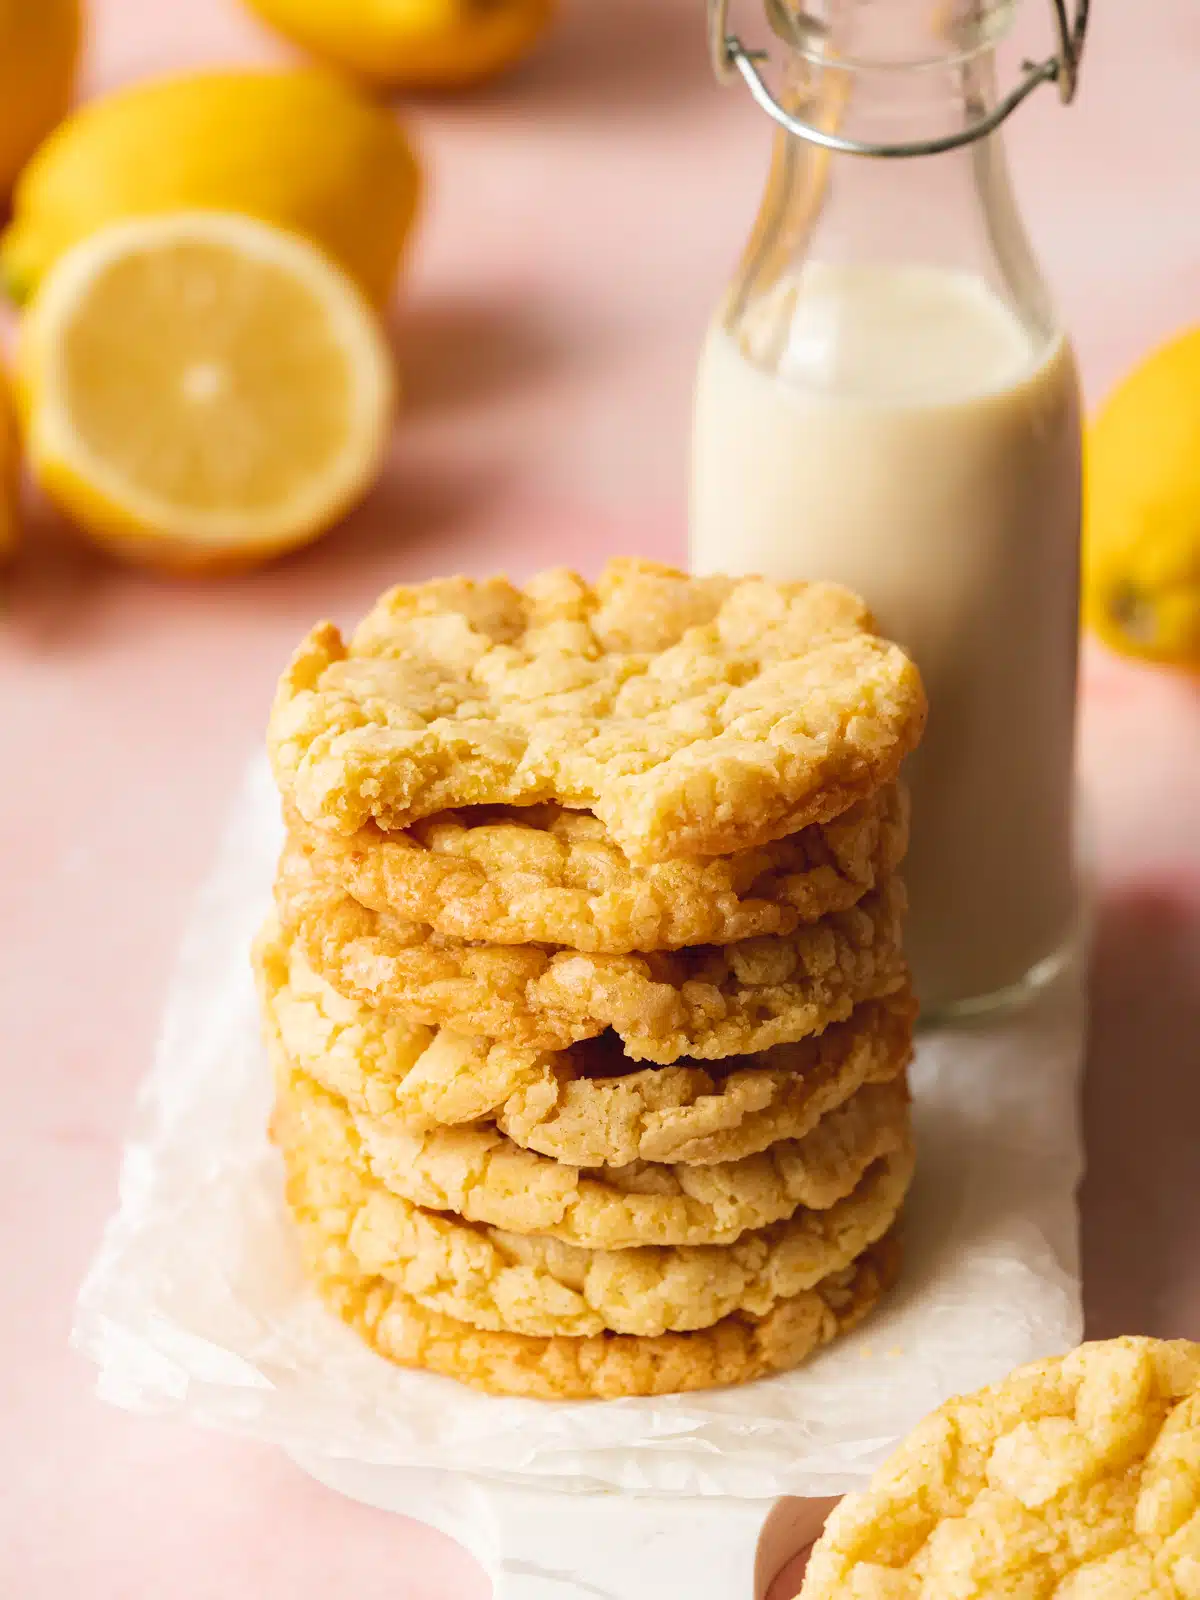 a stack of vegan lemon cookies on a sheet of baking paper with a bottle of milk next to them. There are fresh lemons in the background and the yellow is contrasting against the pink surface.